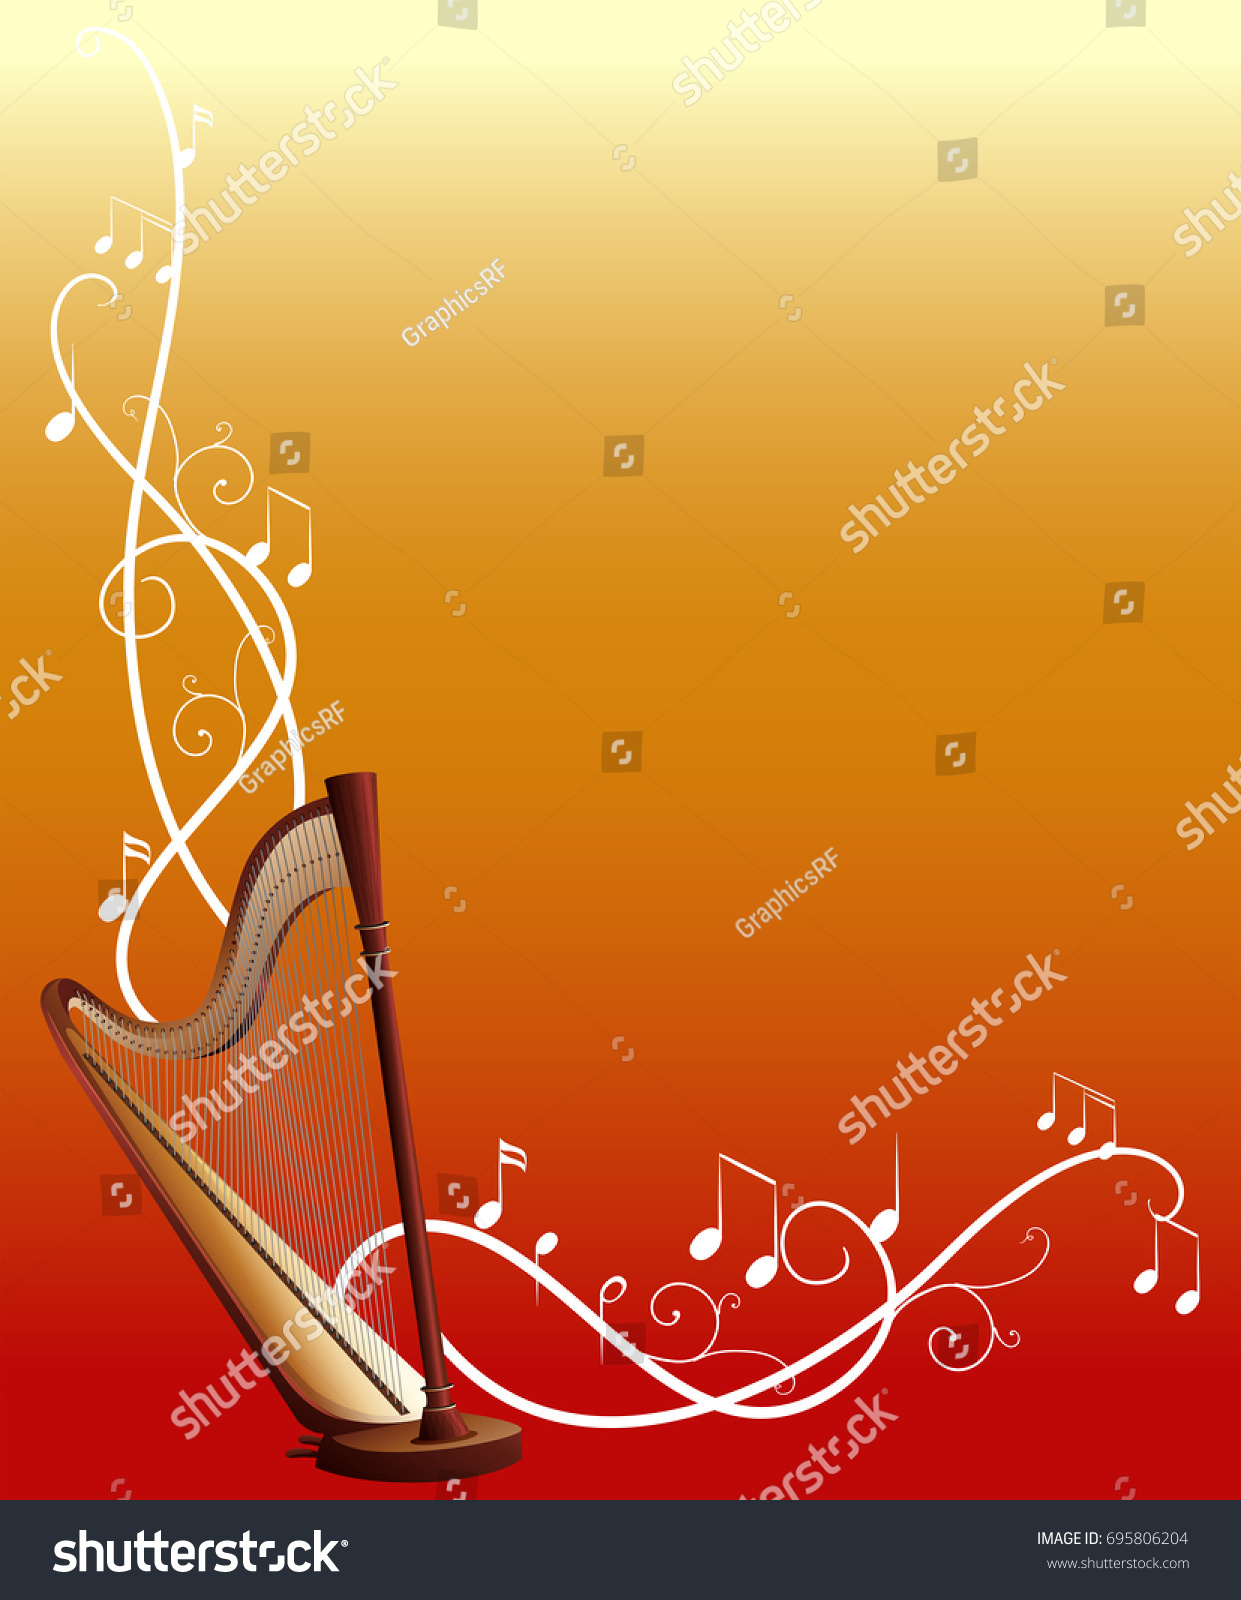 Background template with harp and music notes illustration #695806204